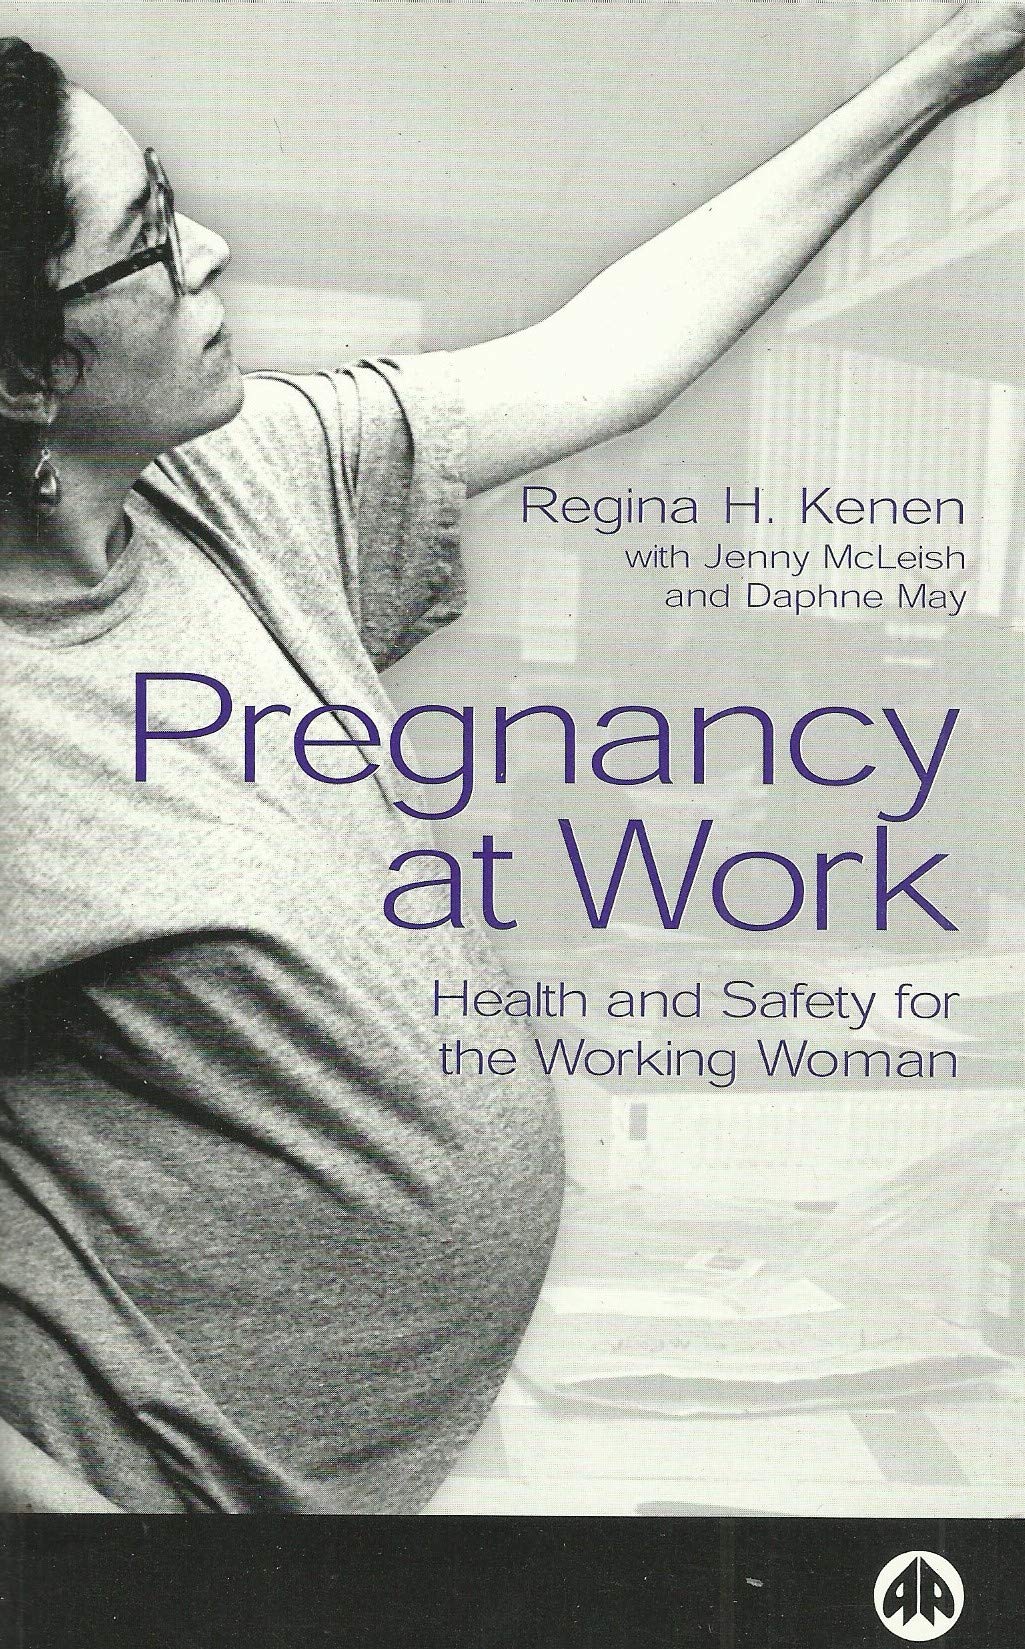 Pregnancy at Work: Health and Safety for the Working Woman